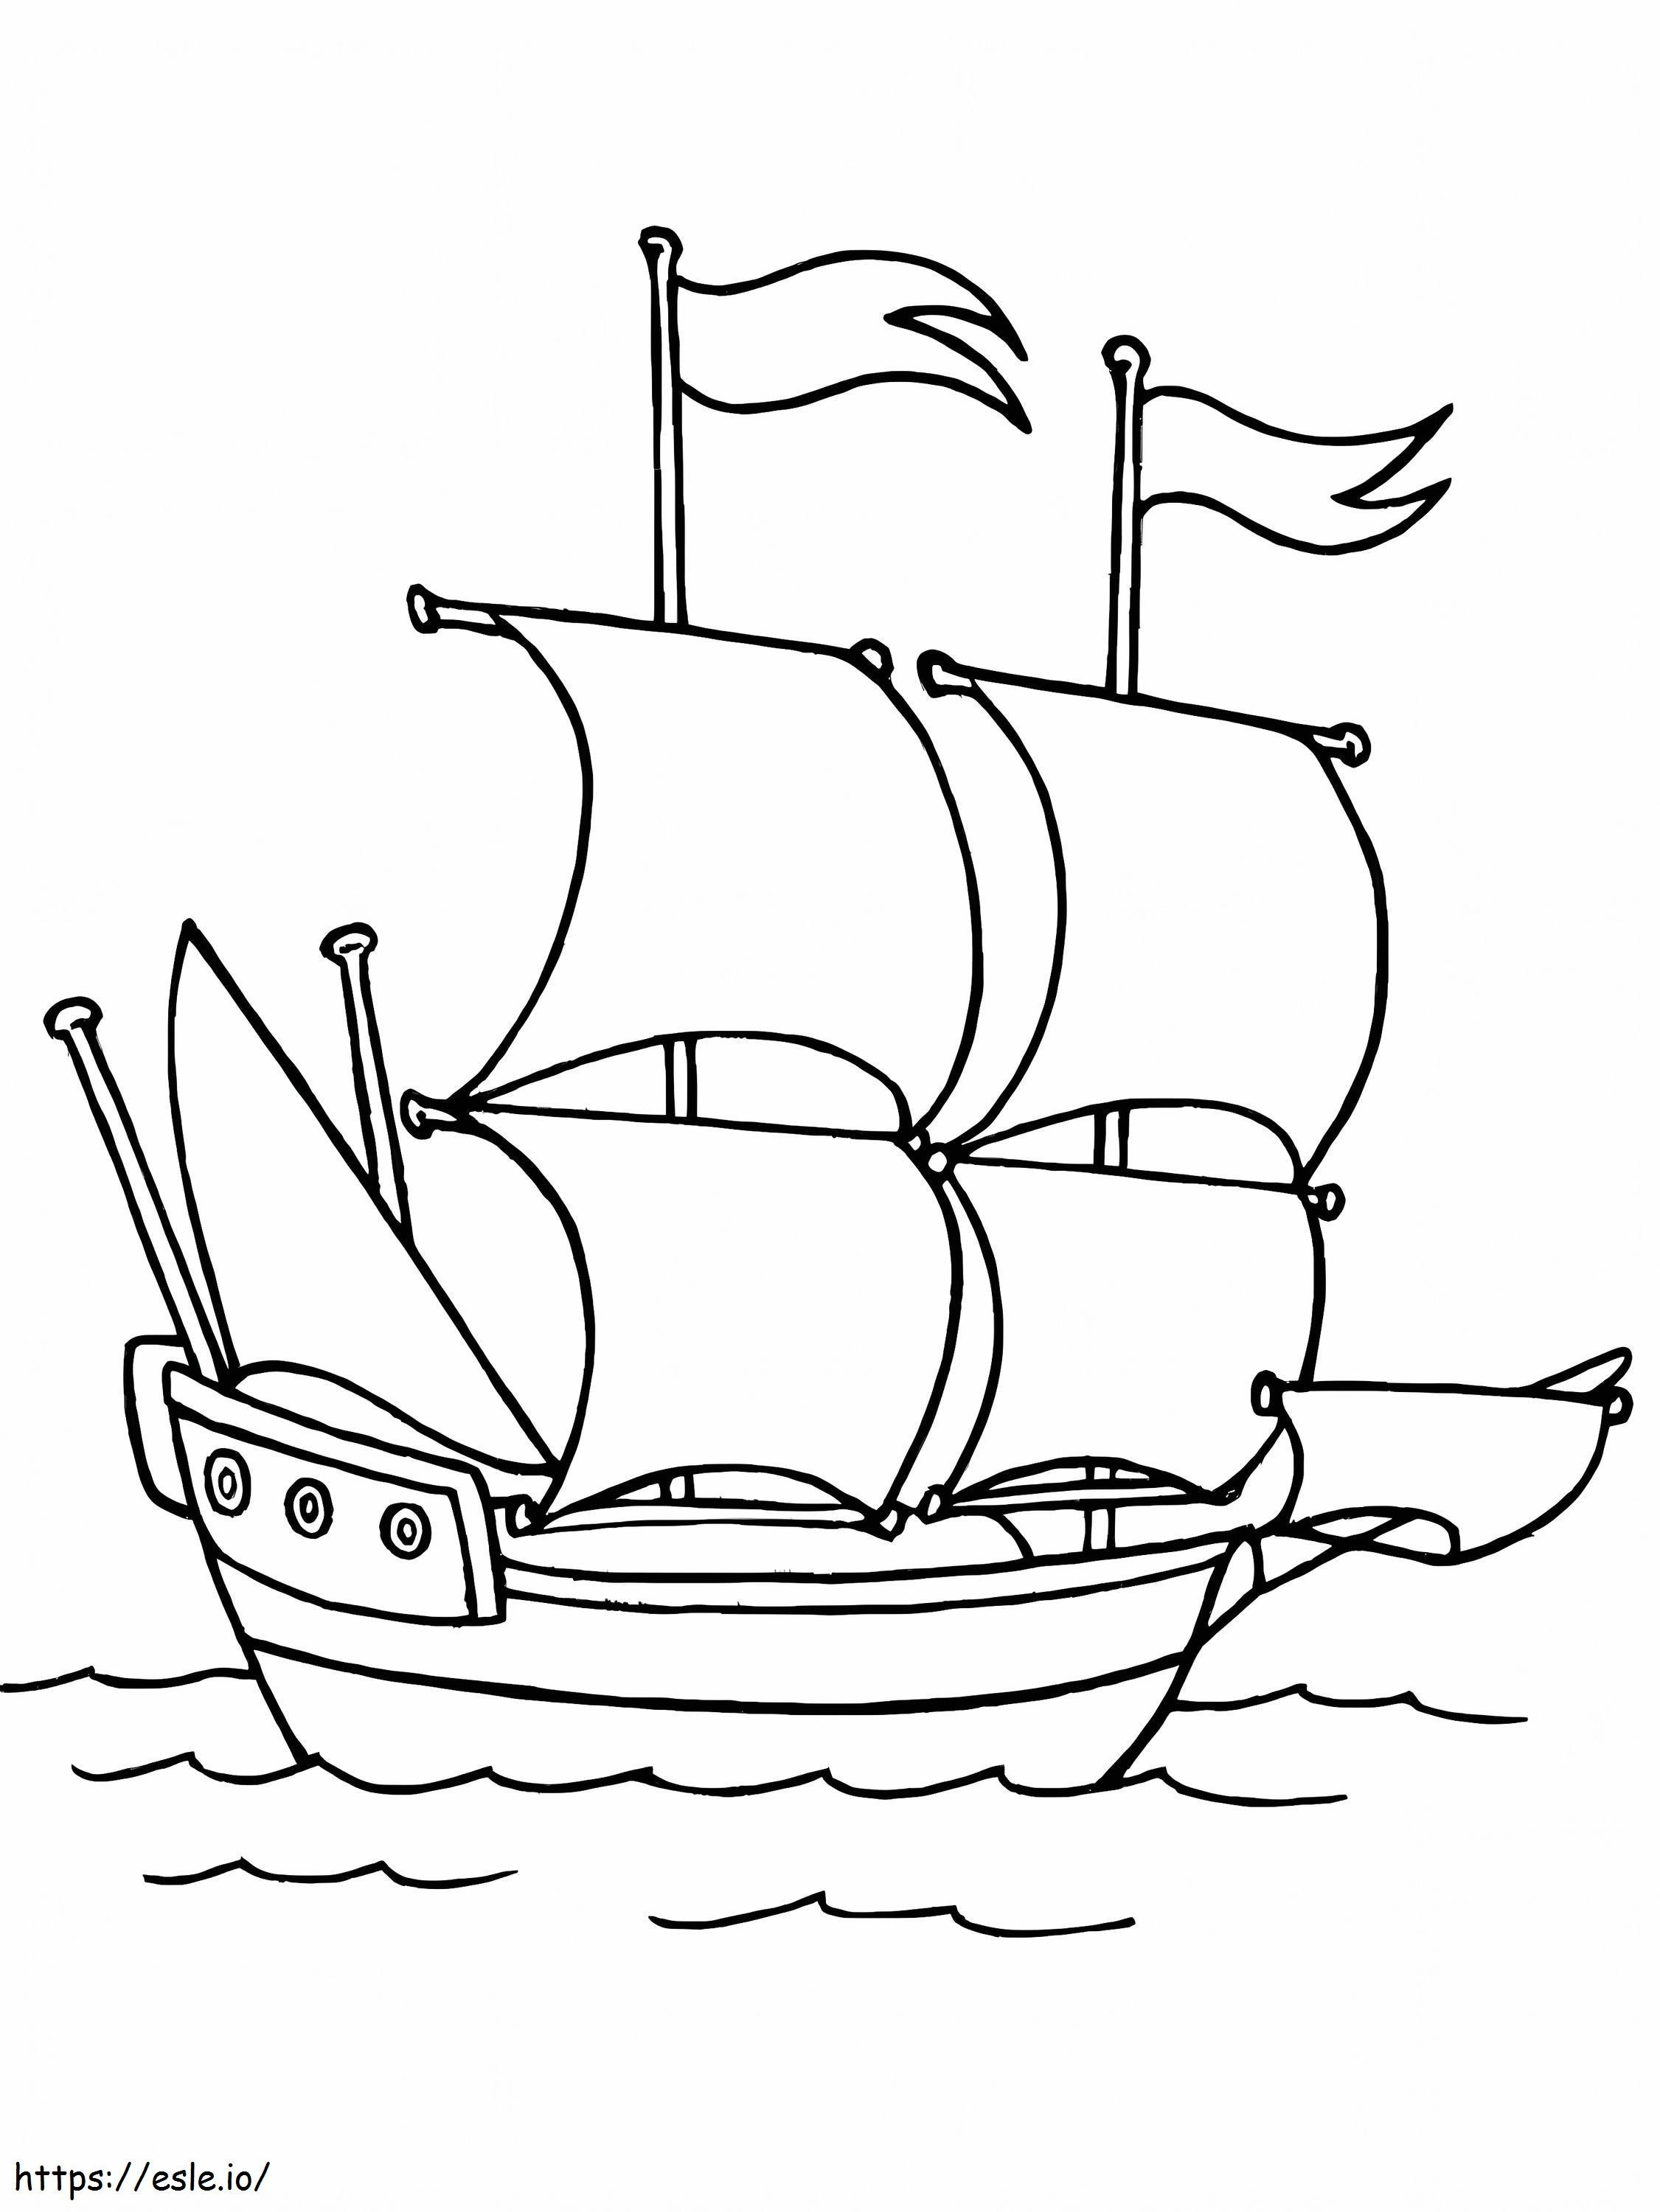 The Mayflower 2 coloring page